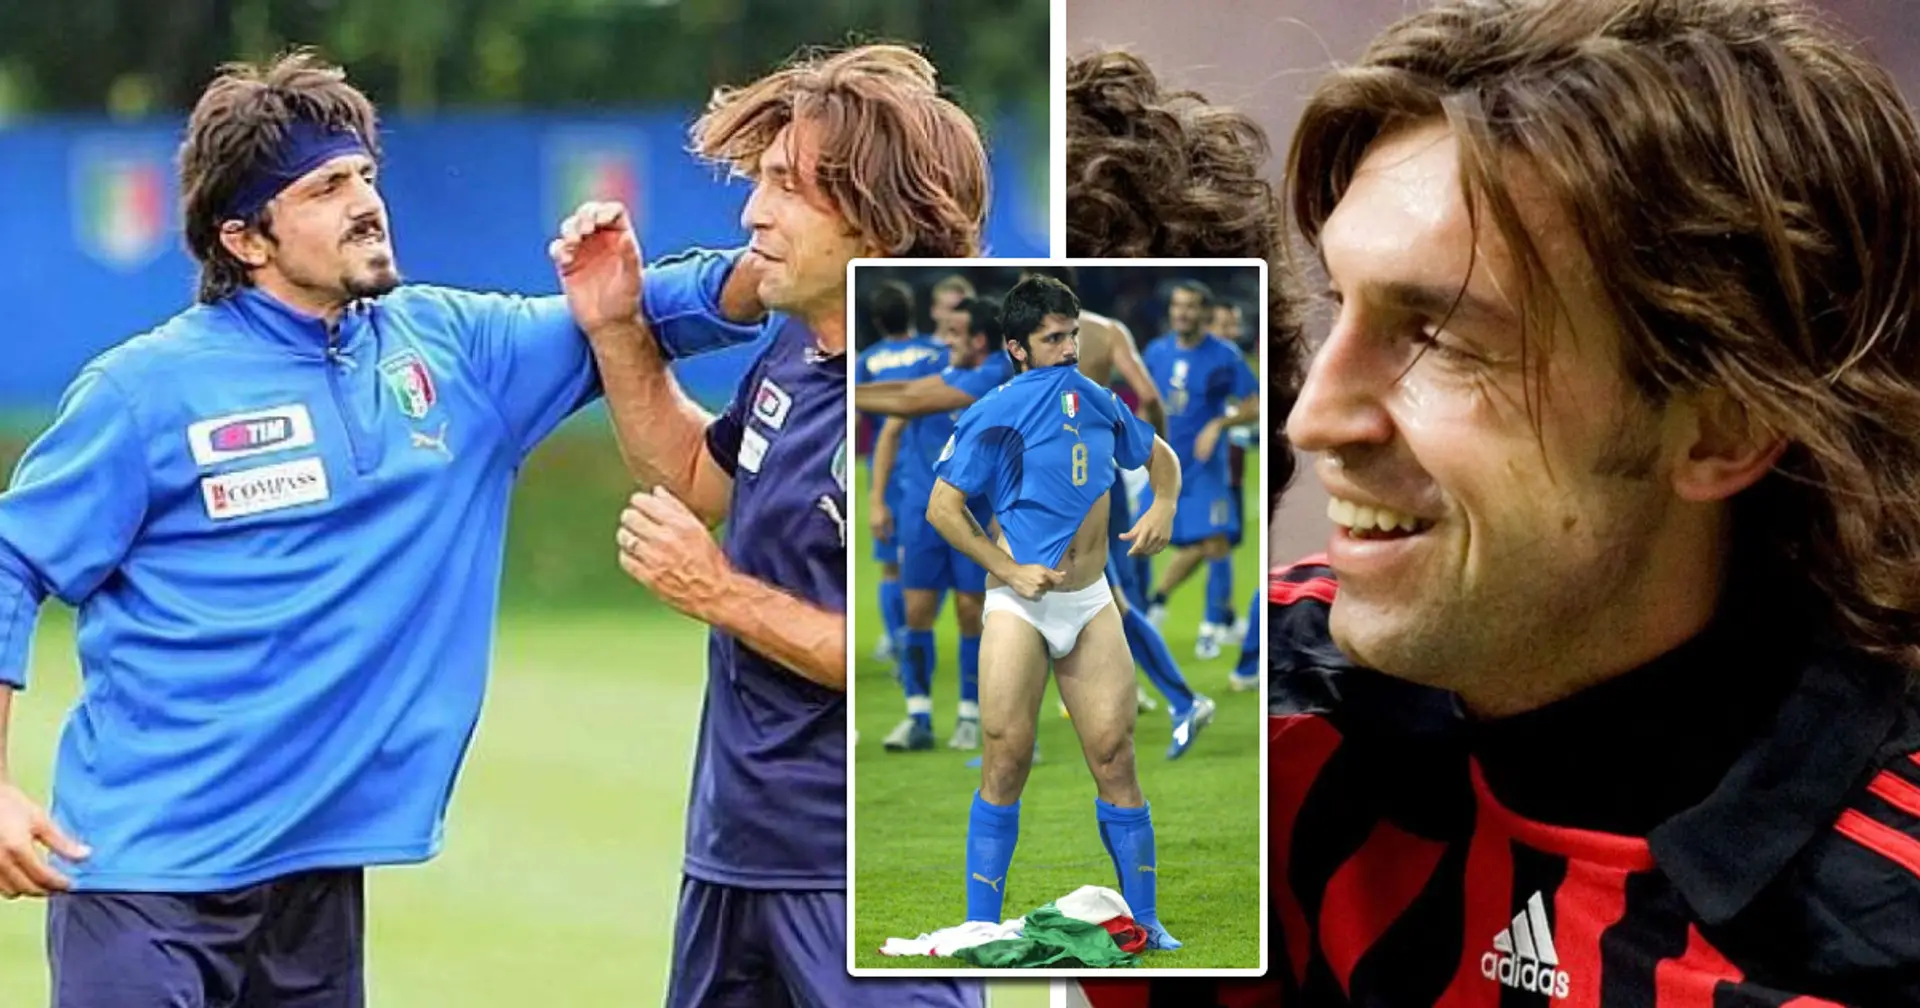 'Some of us ended up missing games because of Rino's fork attacks': Andrea Pirlo recalls a hilarious story with Gattuso